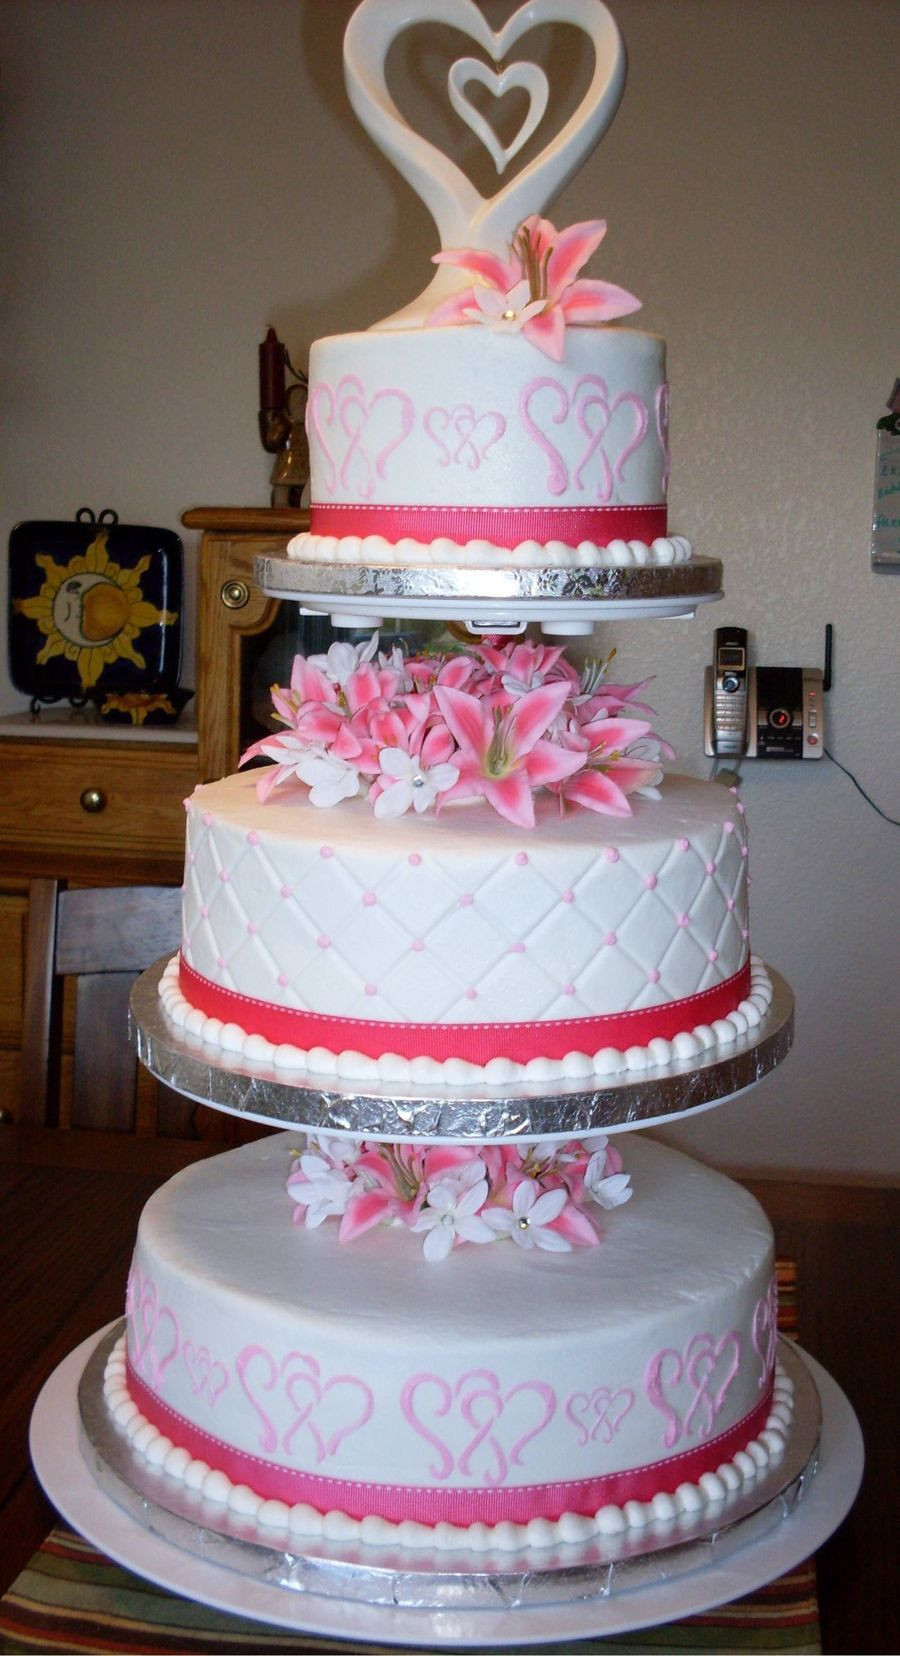 Wedding Cakes 3 Tier
 Pink And White 3 Tier Wedding Cake CakeCentral